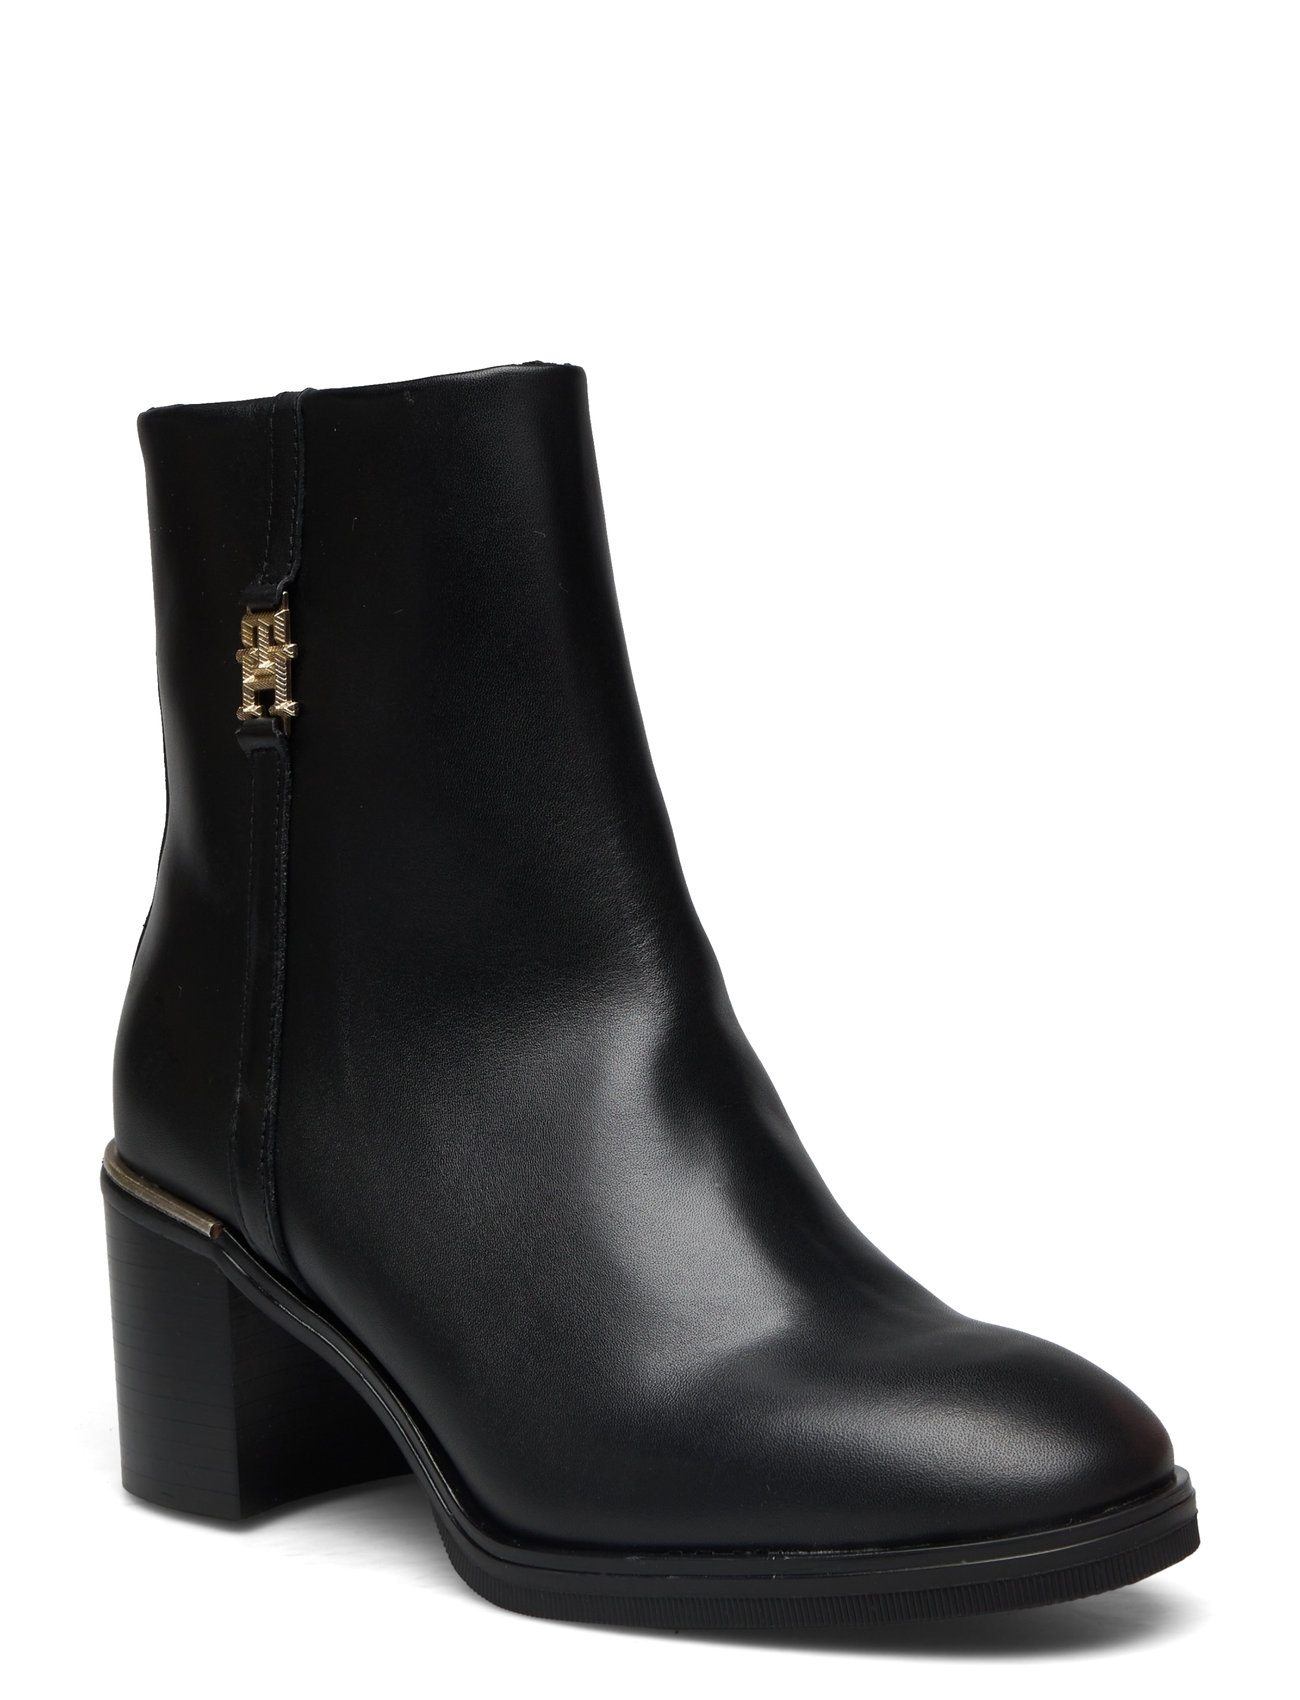 Feminine Th Hardware Mid Bootie Shoes Boots Ankle Boots Ankle Boots With Heel Black Tommy Hilfiger